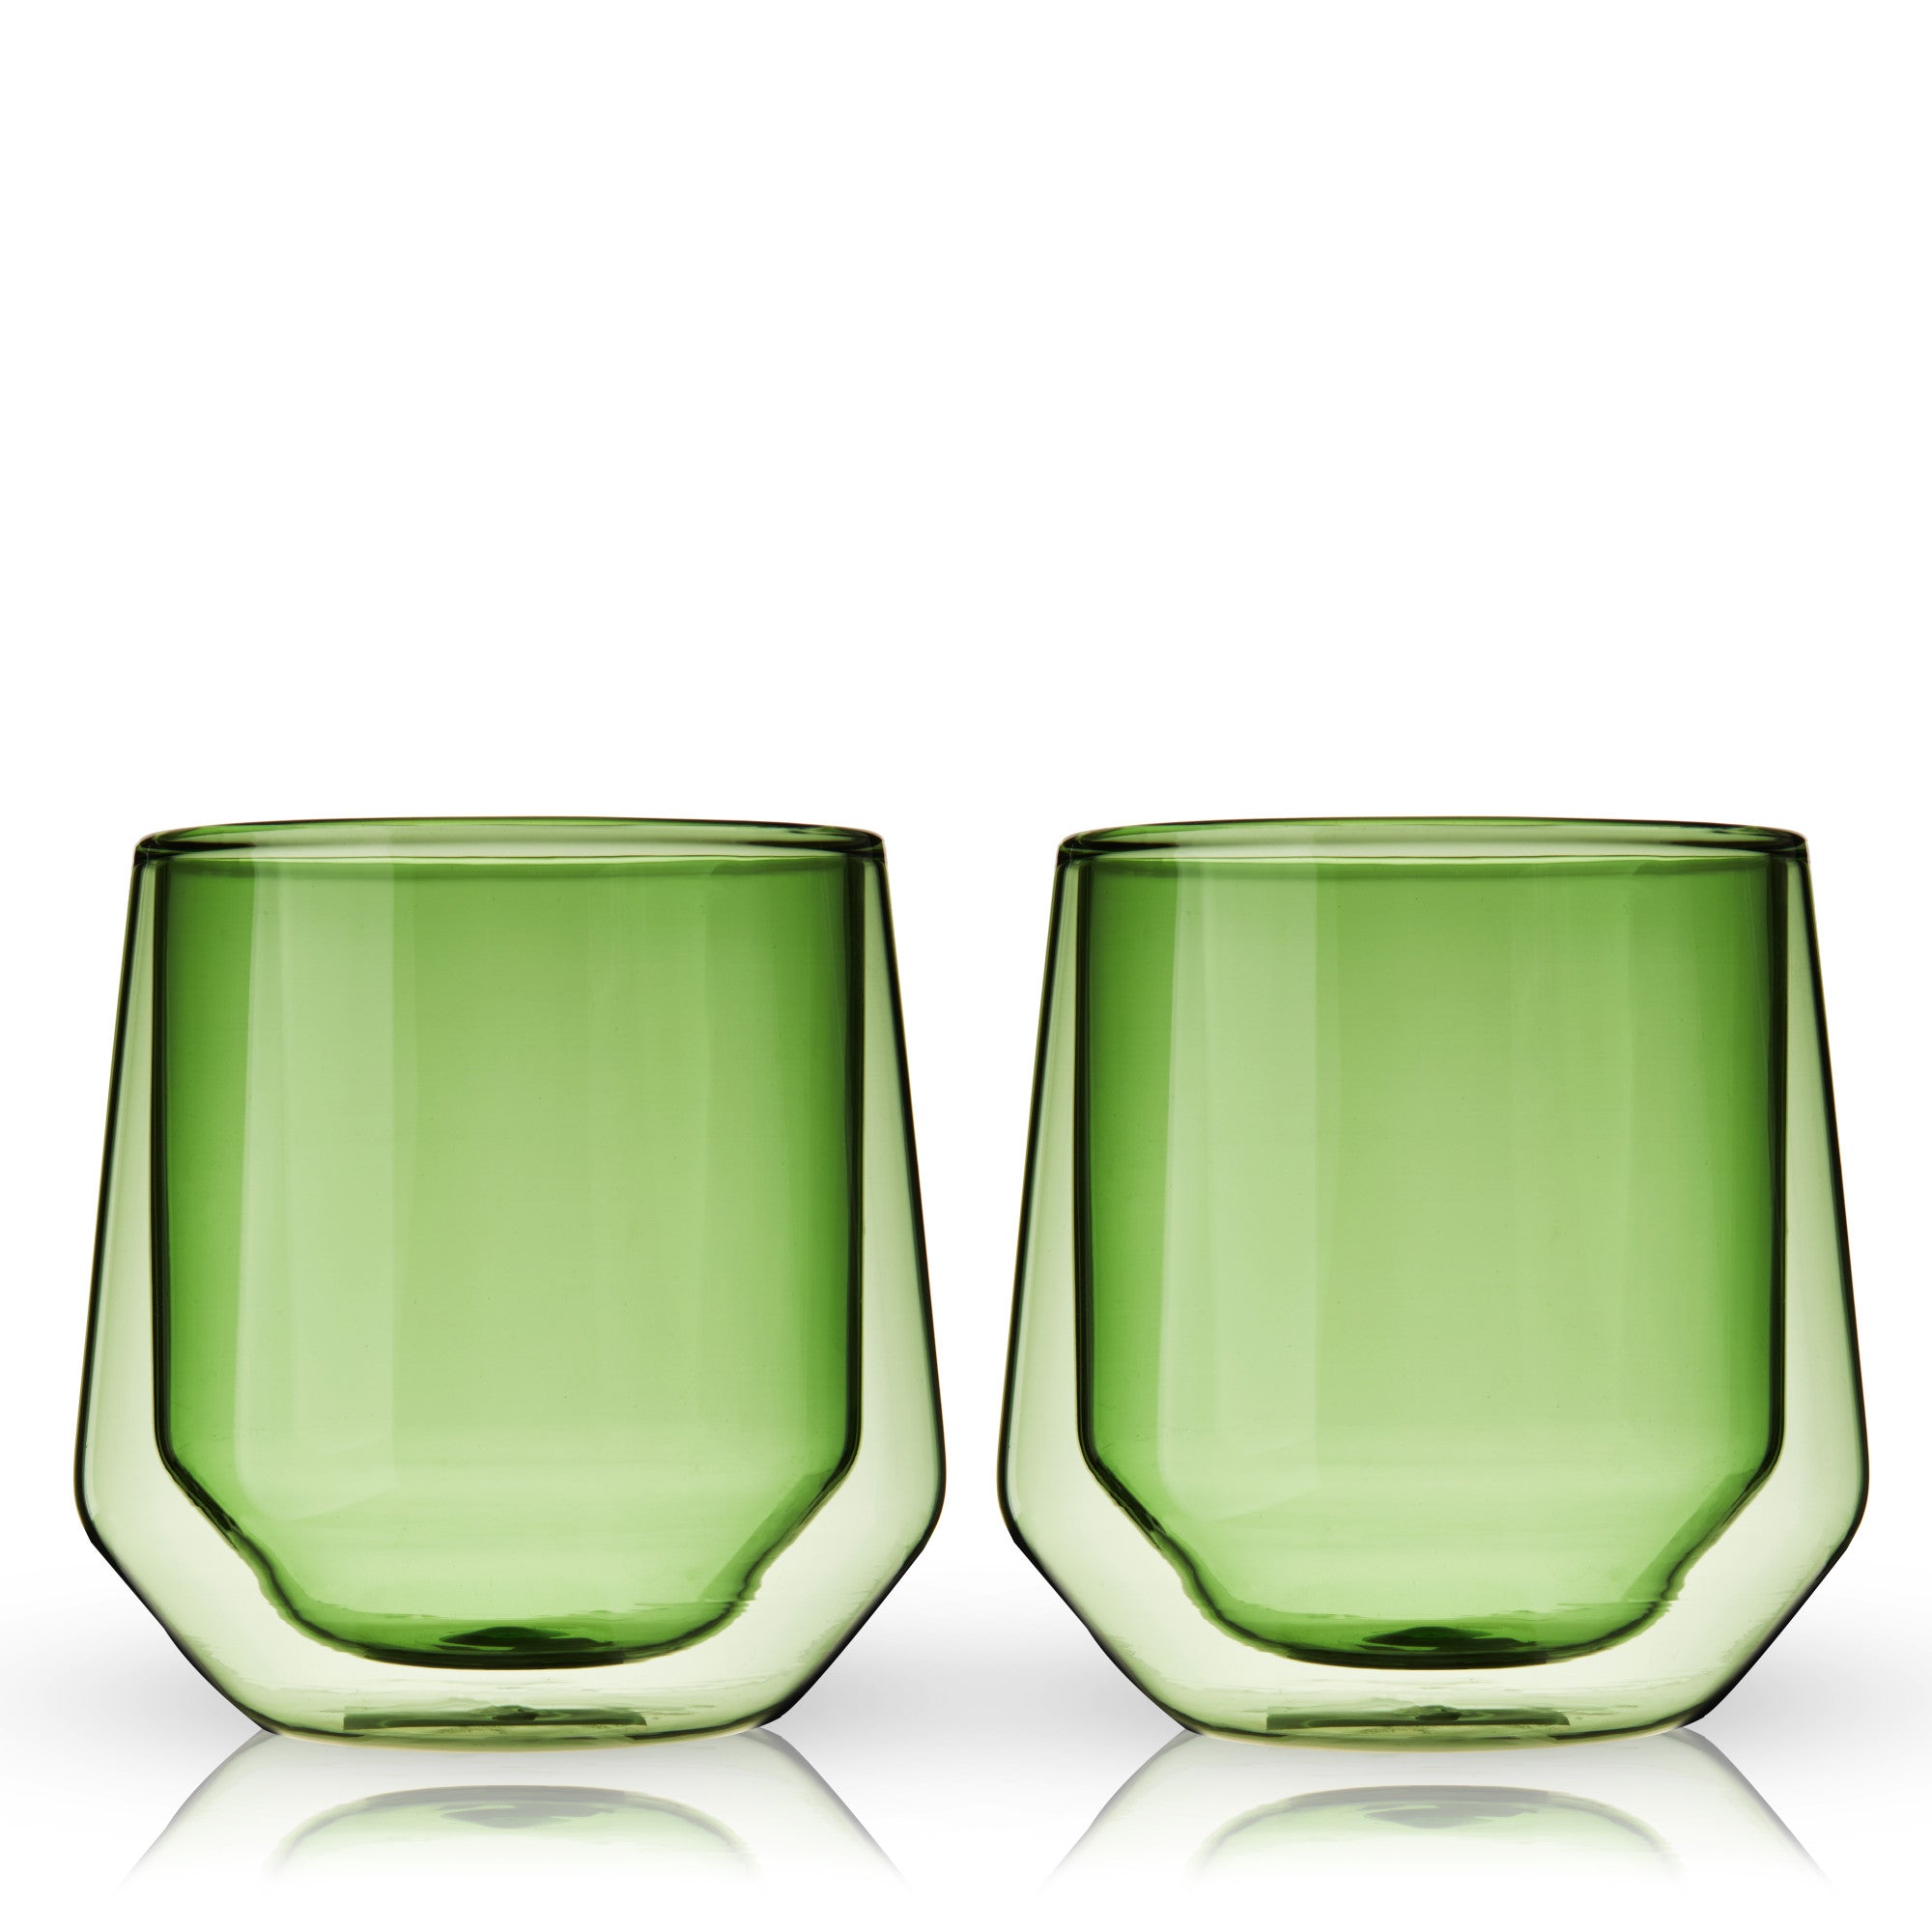 Double Walled Aurora Tumblers in Green set of 2 by Viski (11189)